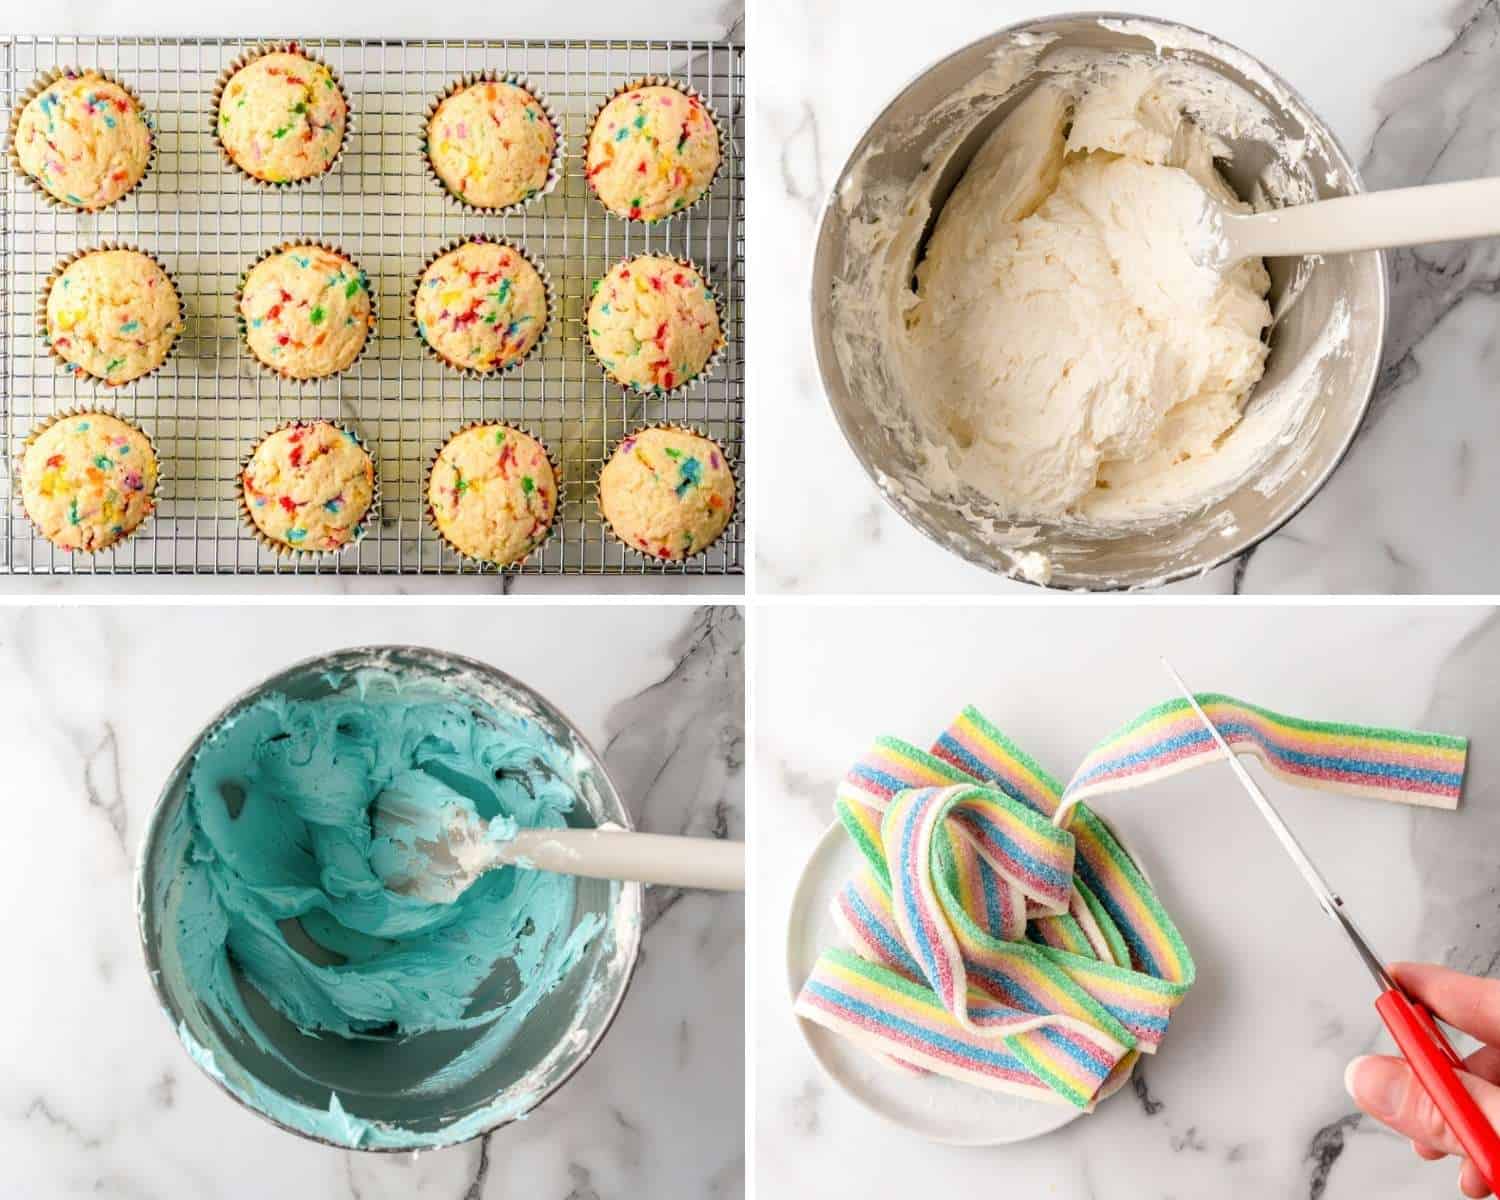 Collage of four images showing how to make frosting and prep decorations for rainbow cupcakes